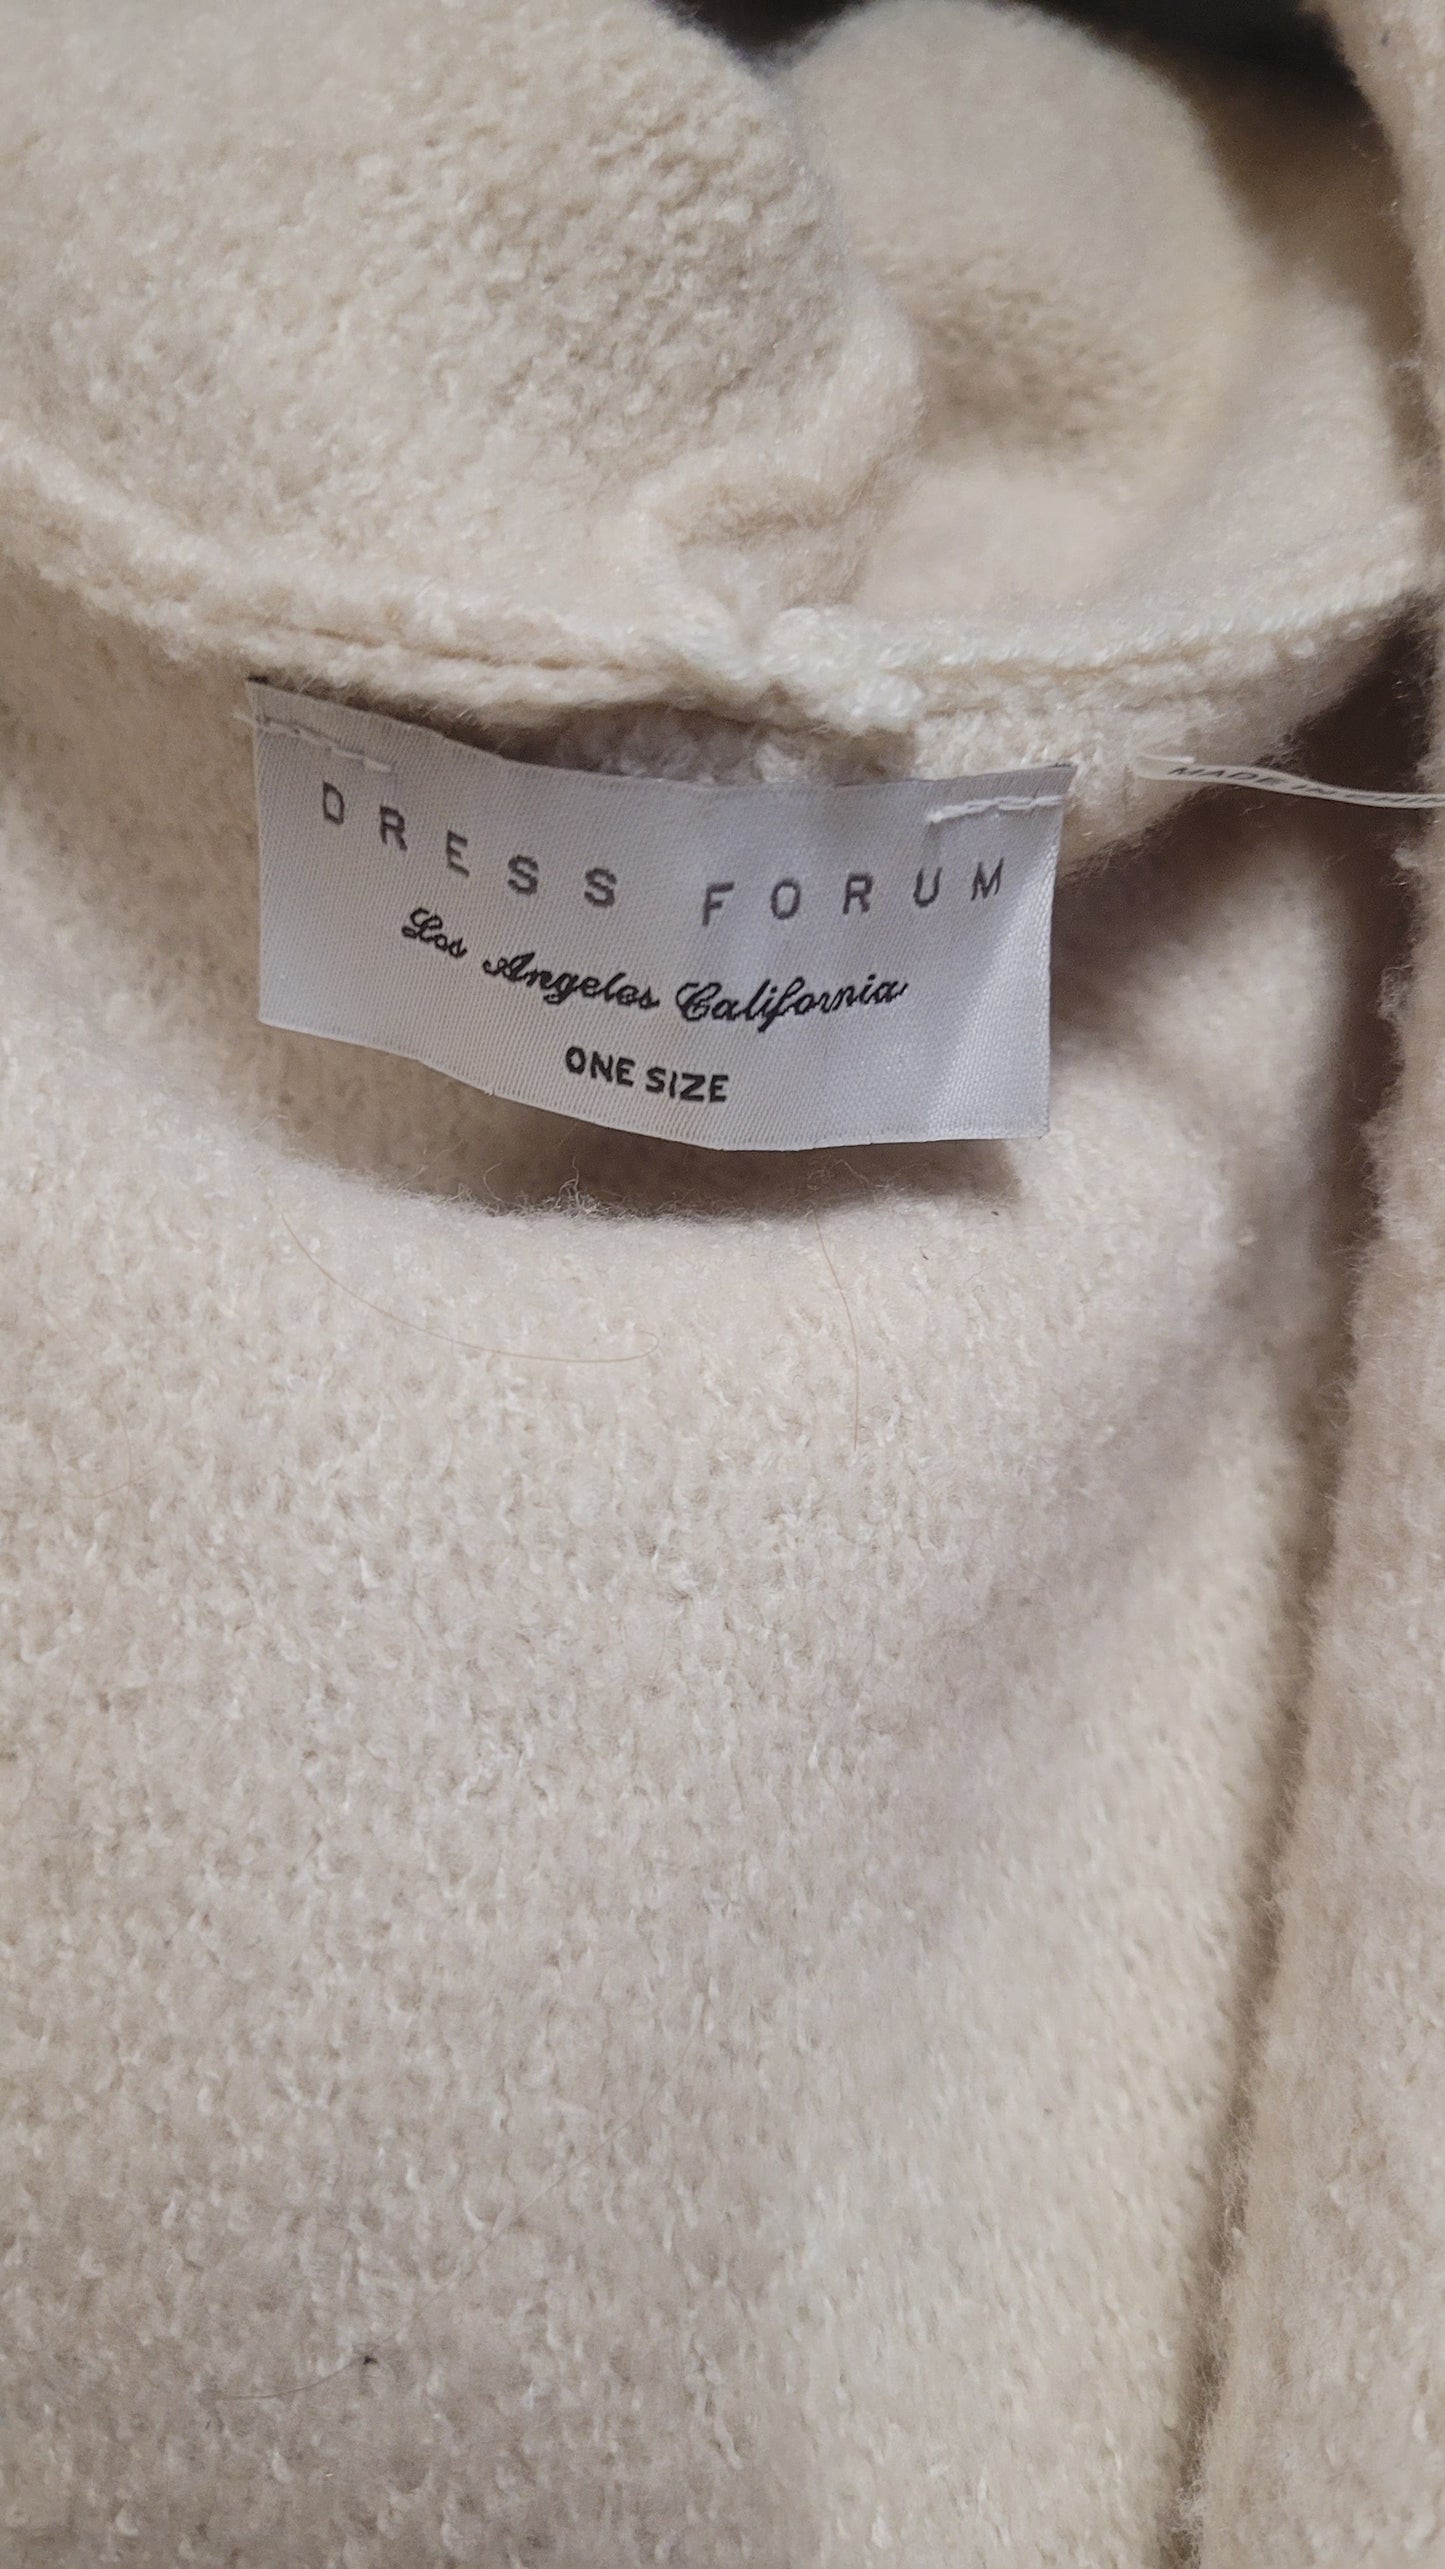 Dress Forum Oversized Hooded Cardigan Cream/Brown - One size